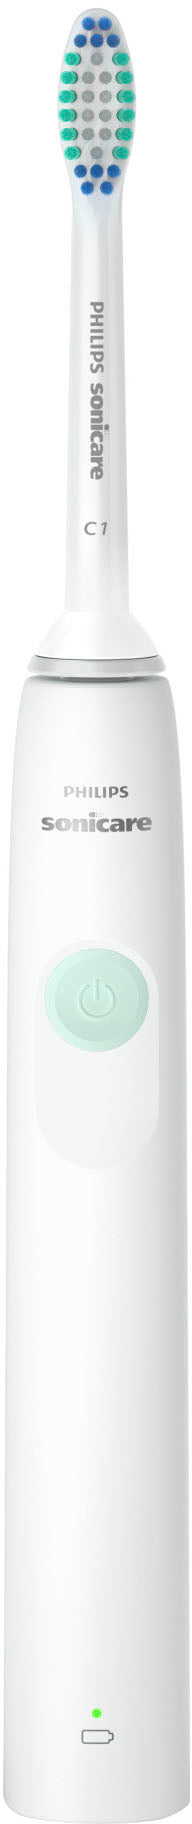 Philips Sonicare - 2100 Power Toothbrush, Rechargeable Electric Toothbrush - White Mint_10